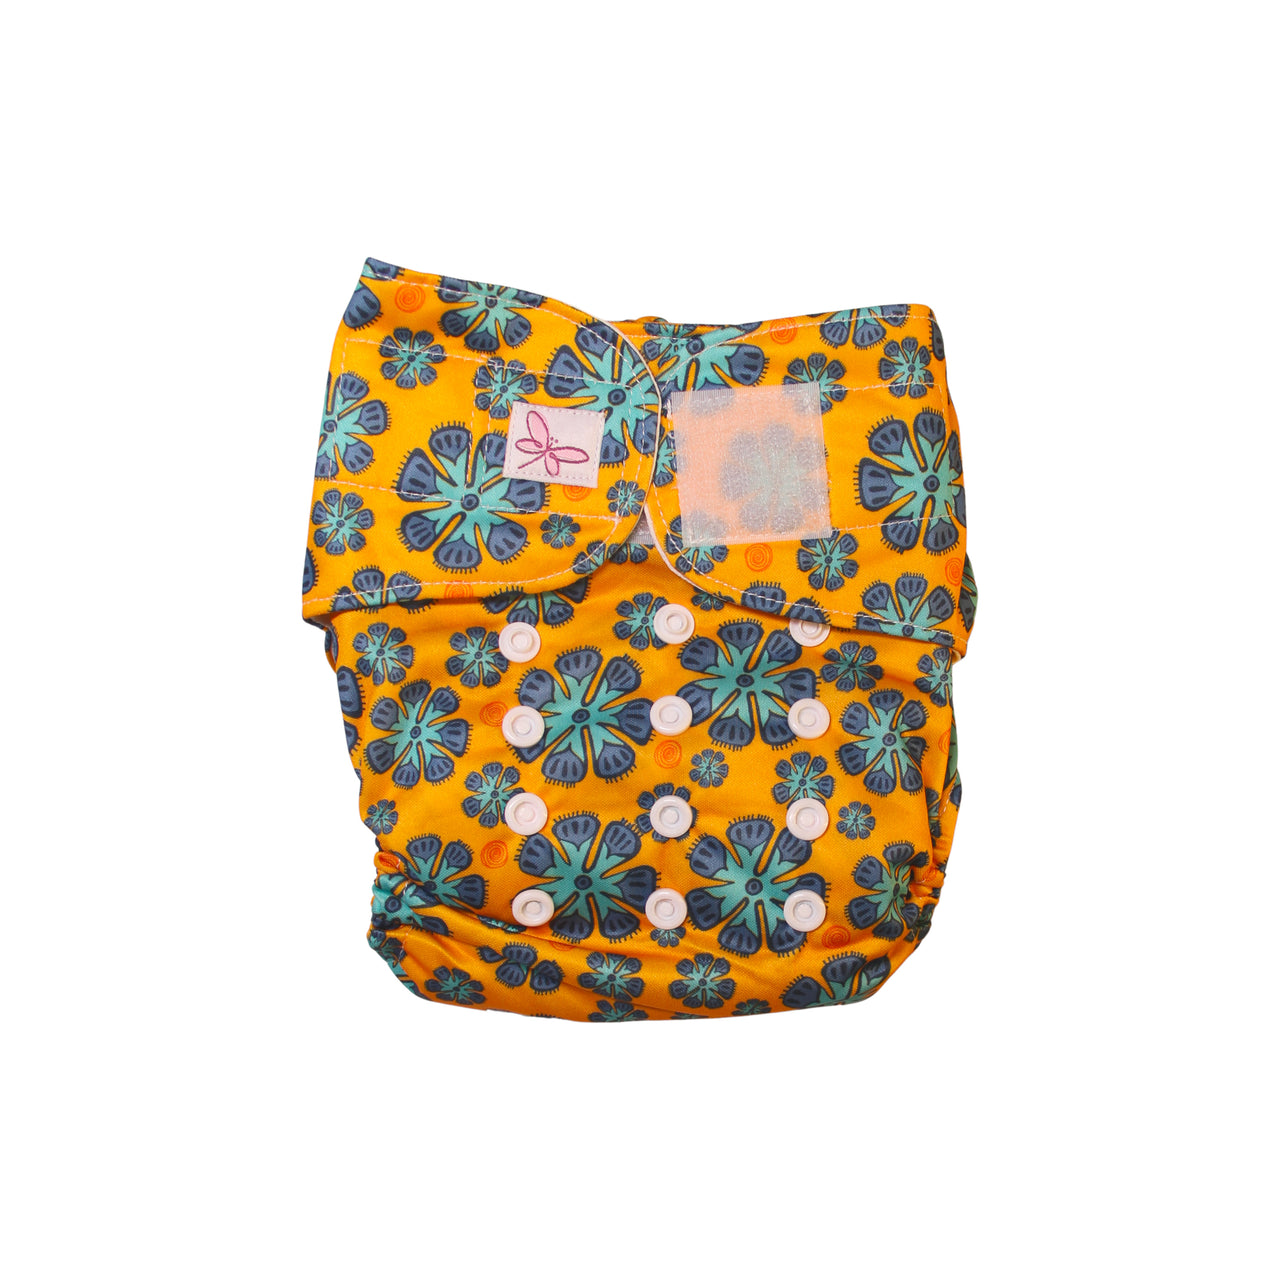 BASIC Daytime Diaper 7-15 kg - with Stay-Dry layer